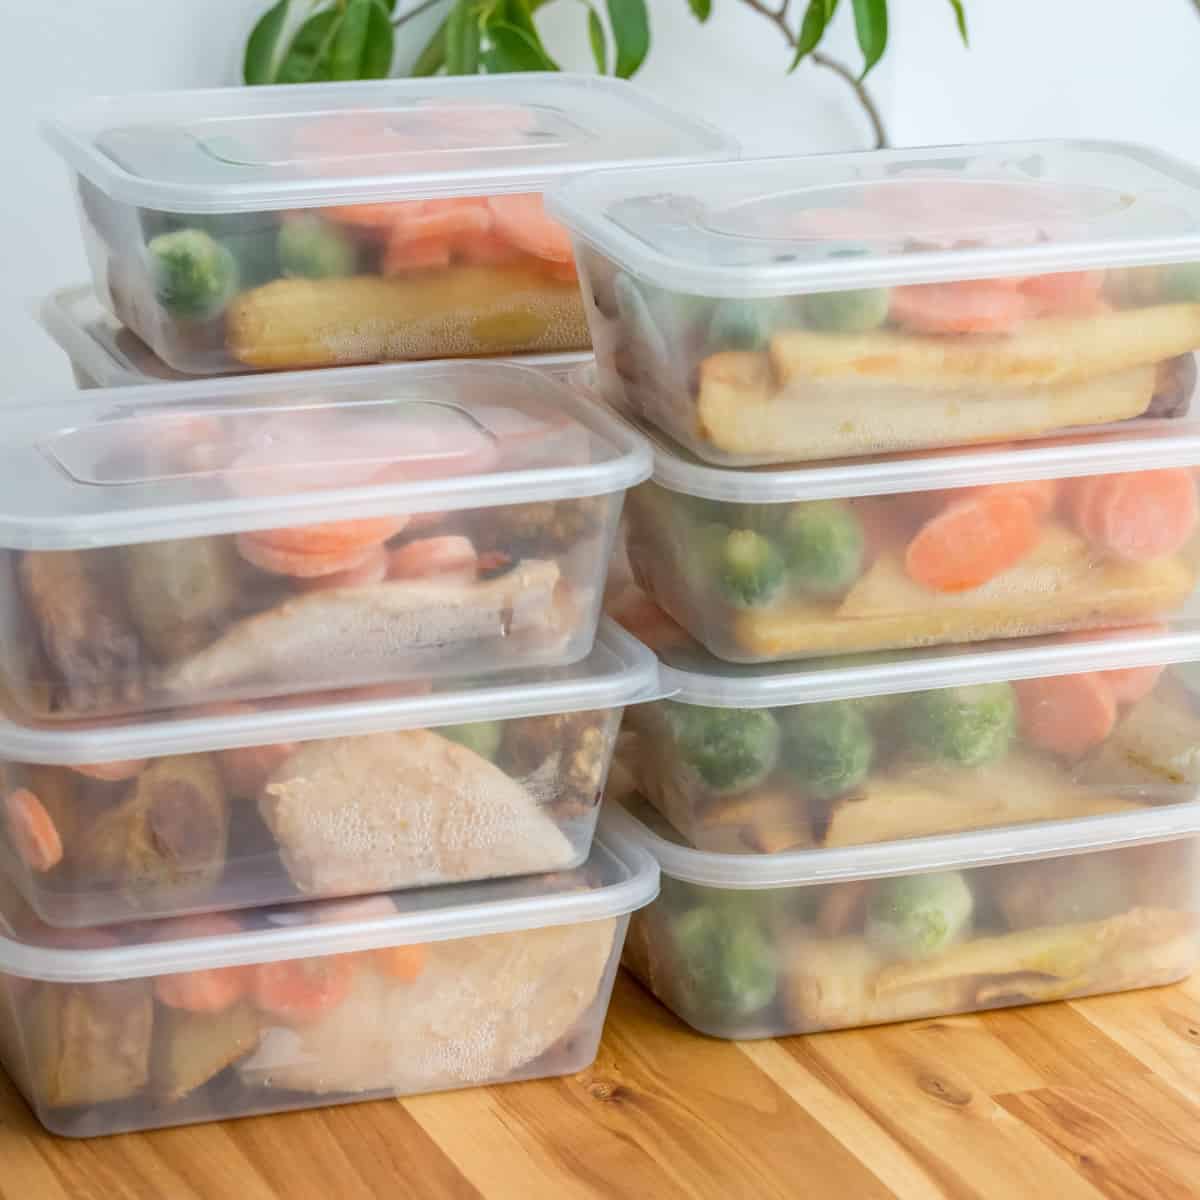 Meal prep containers stacked on cutting board